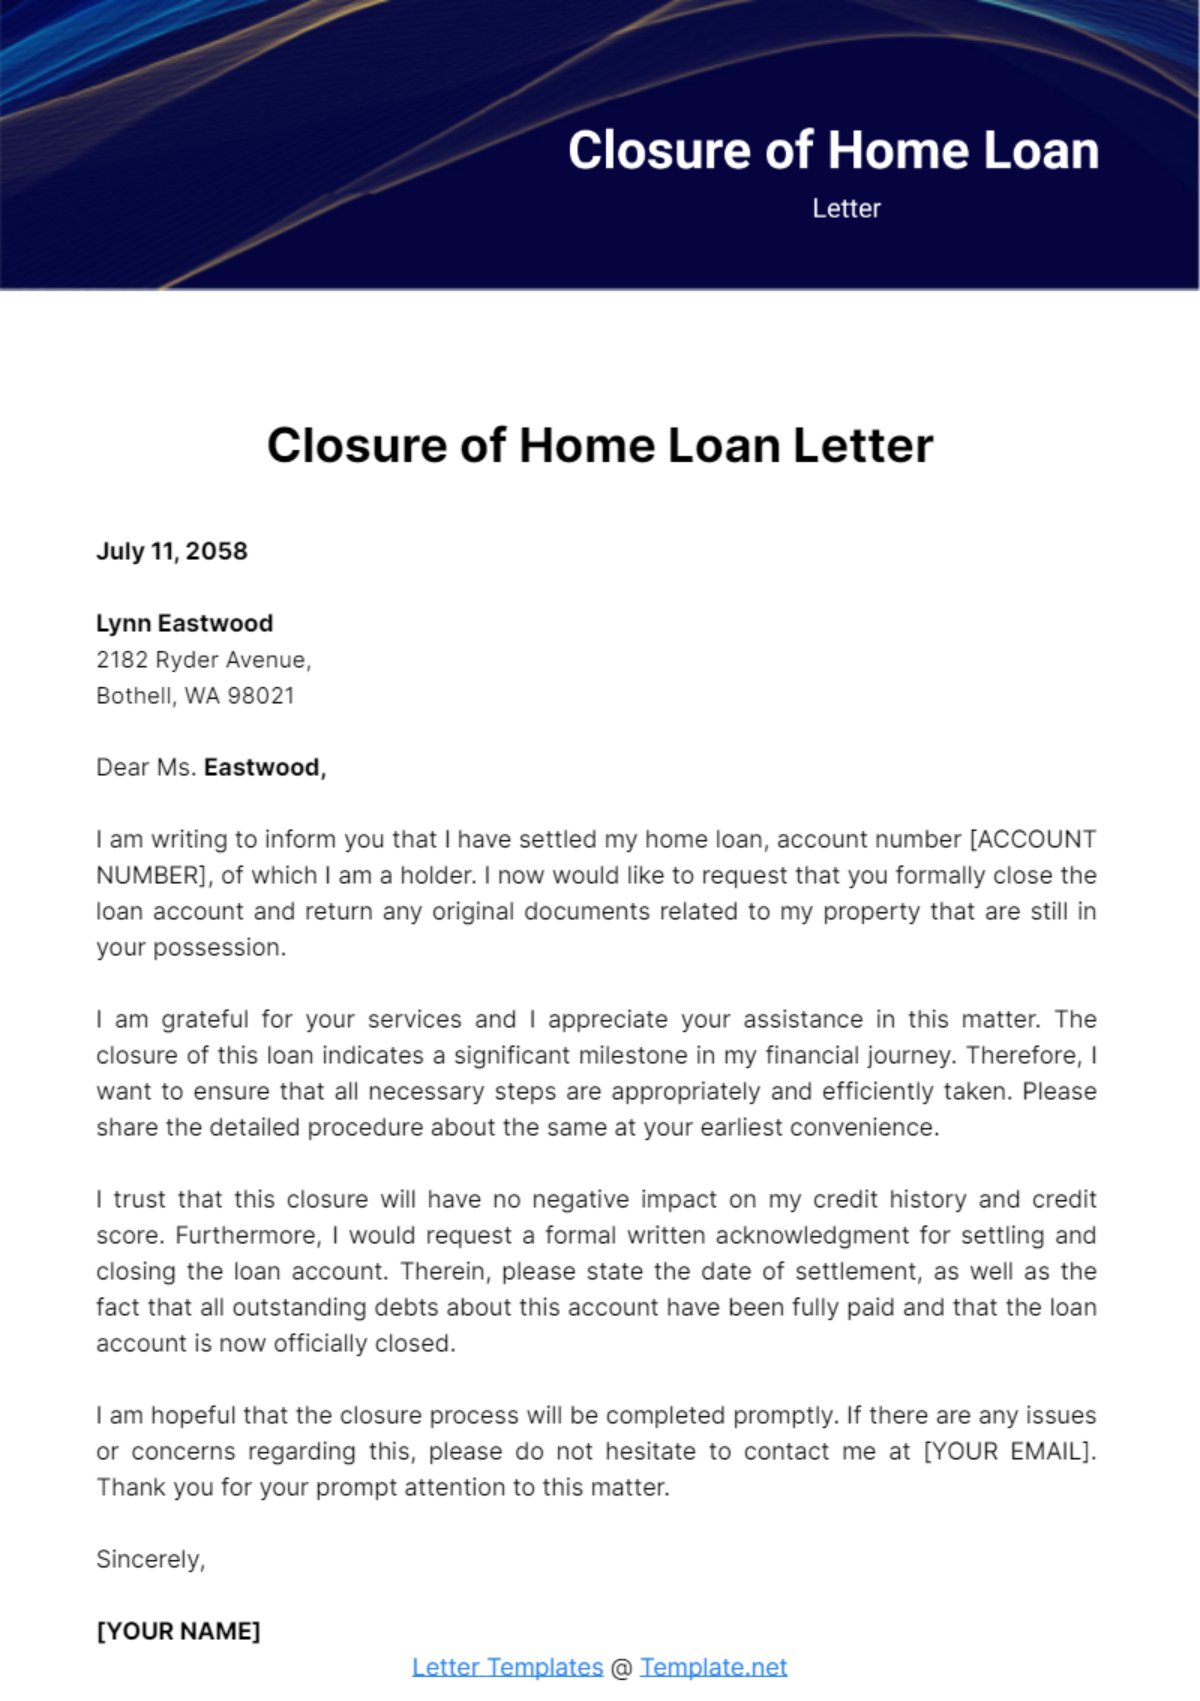 Free Closure of Home Loan Letter Template